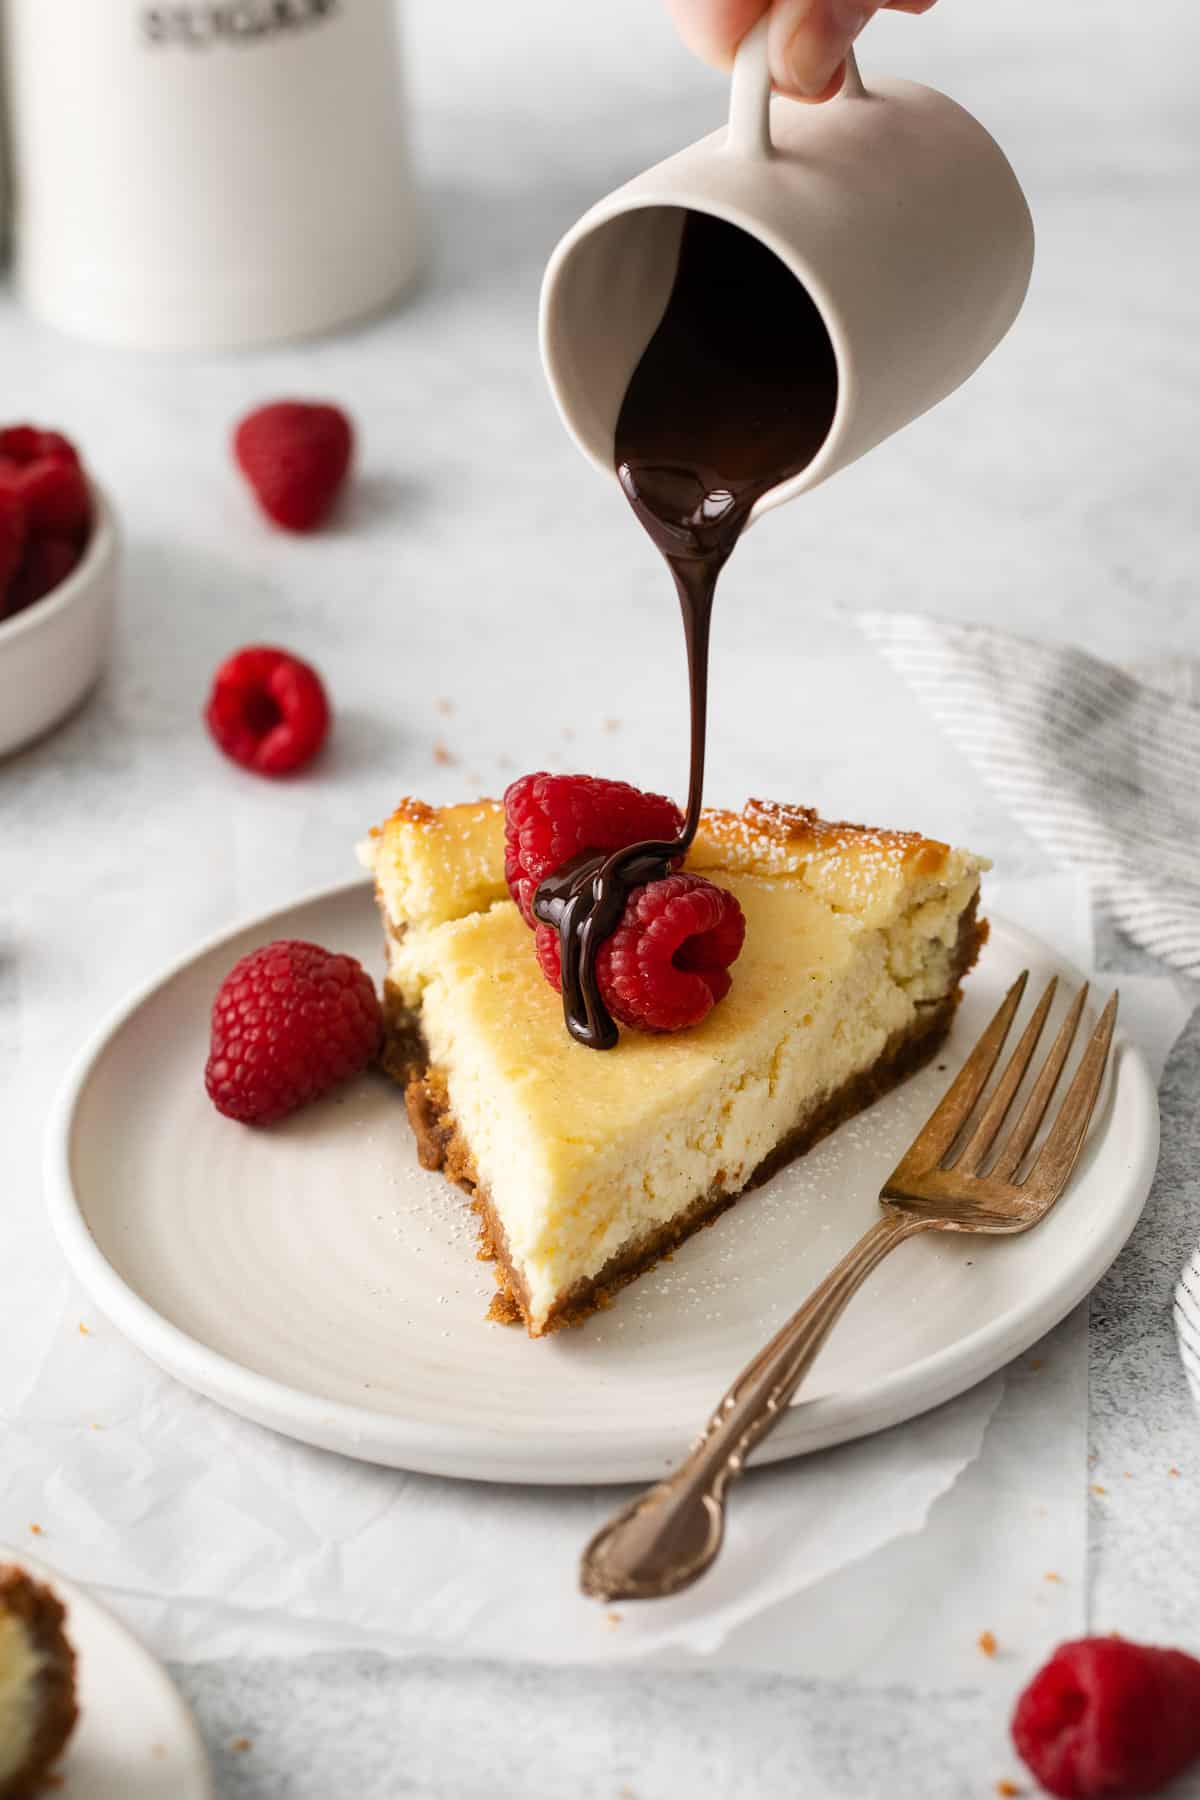 Slice of ricotta cheesecake topped with chocolate.